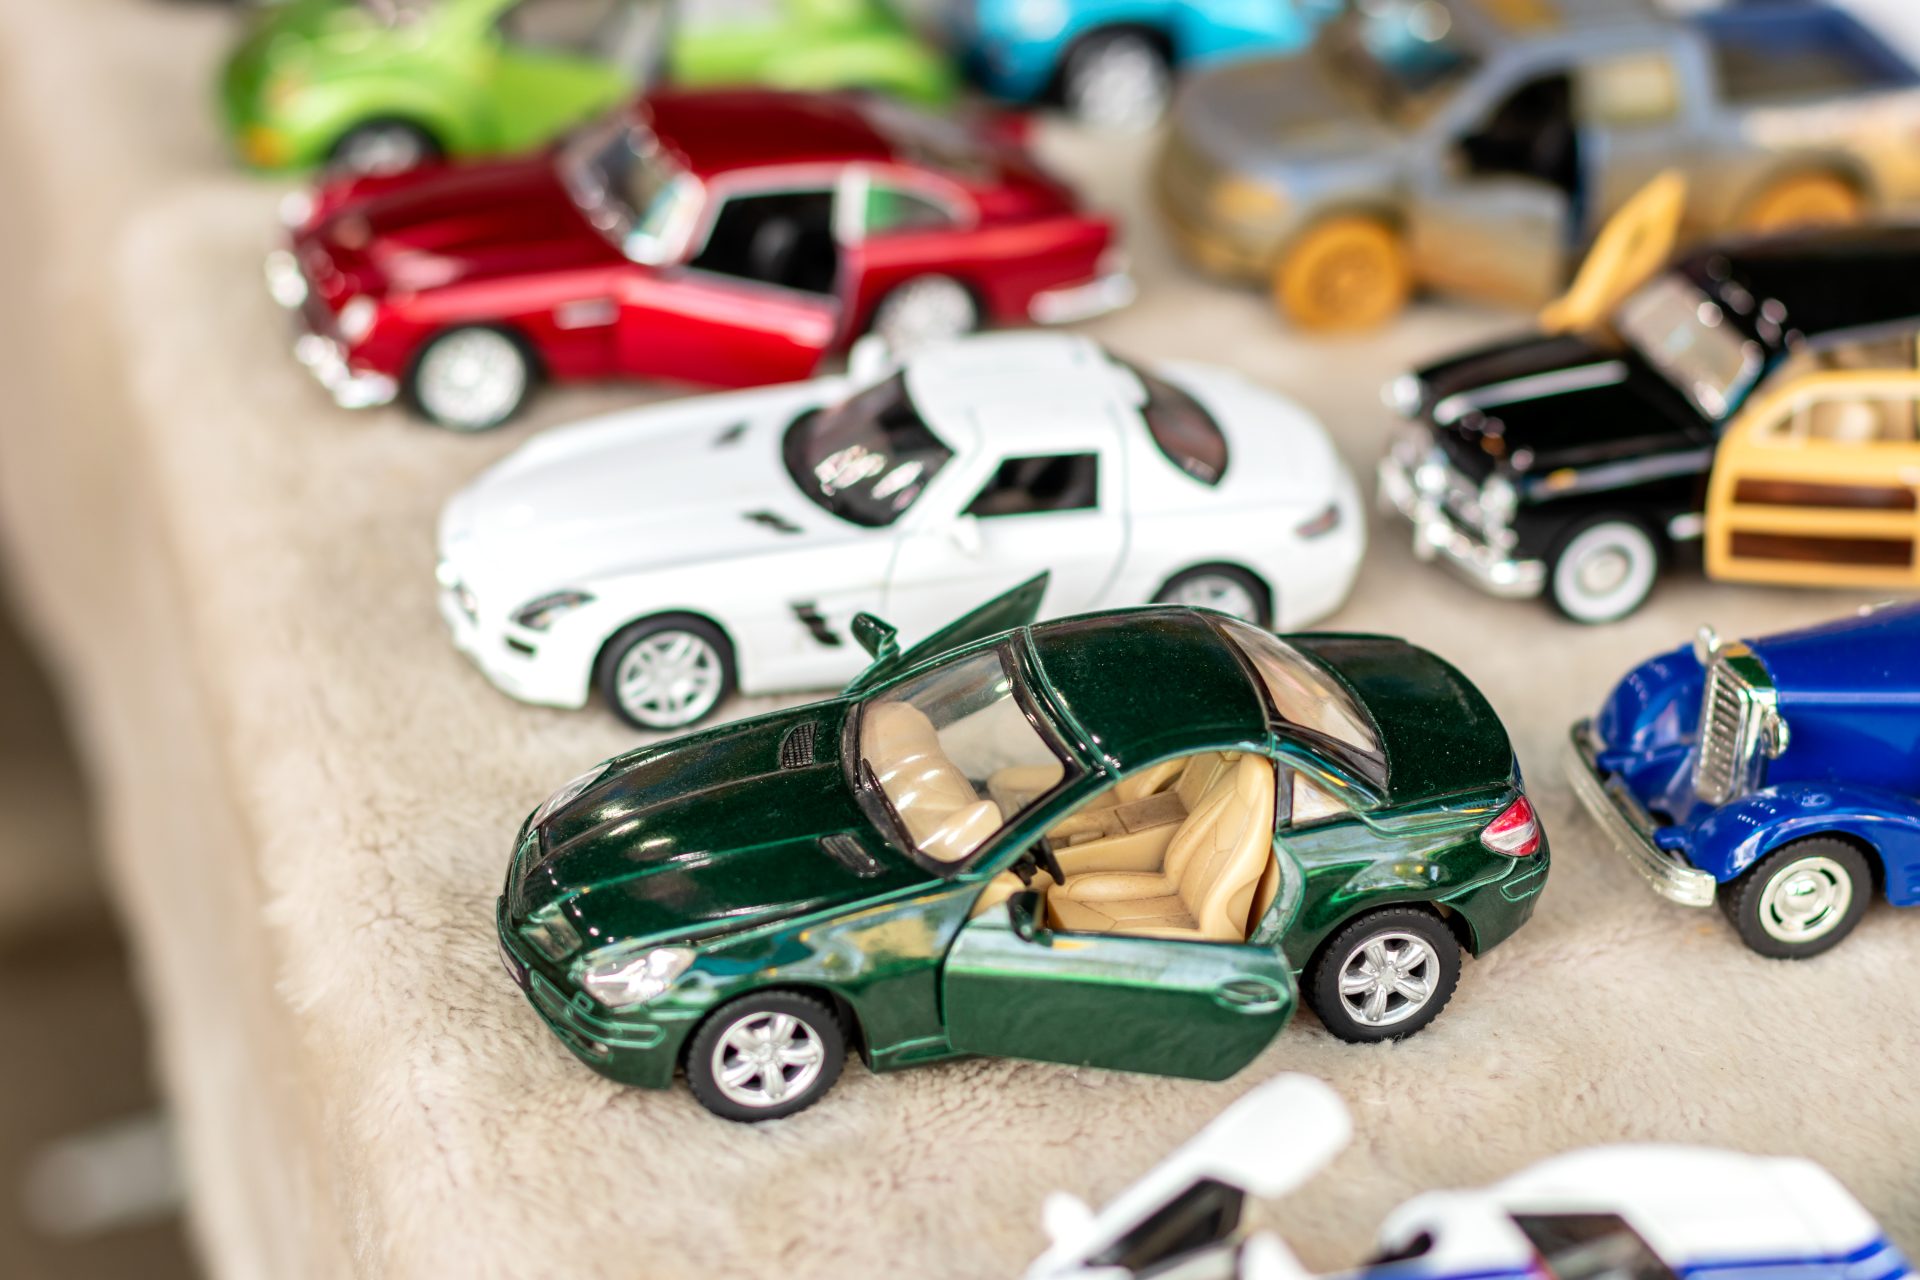 Toy Cars In Singapore: 7 Places To Shop For Diecast Collectibles